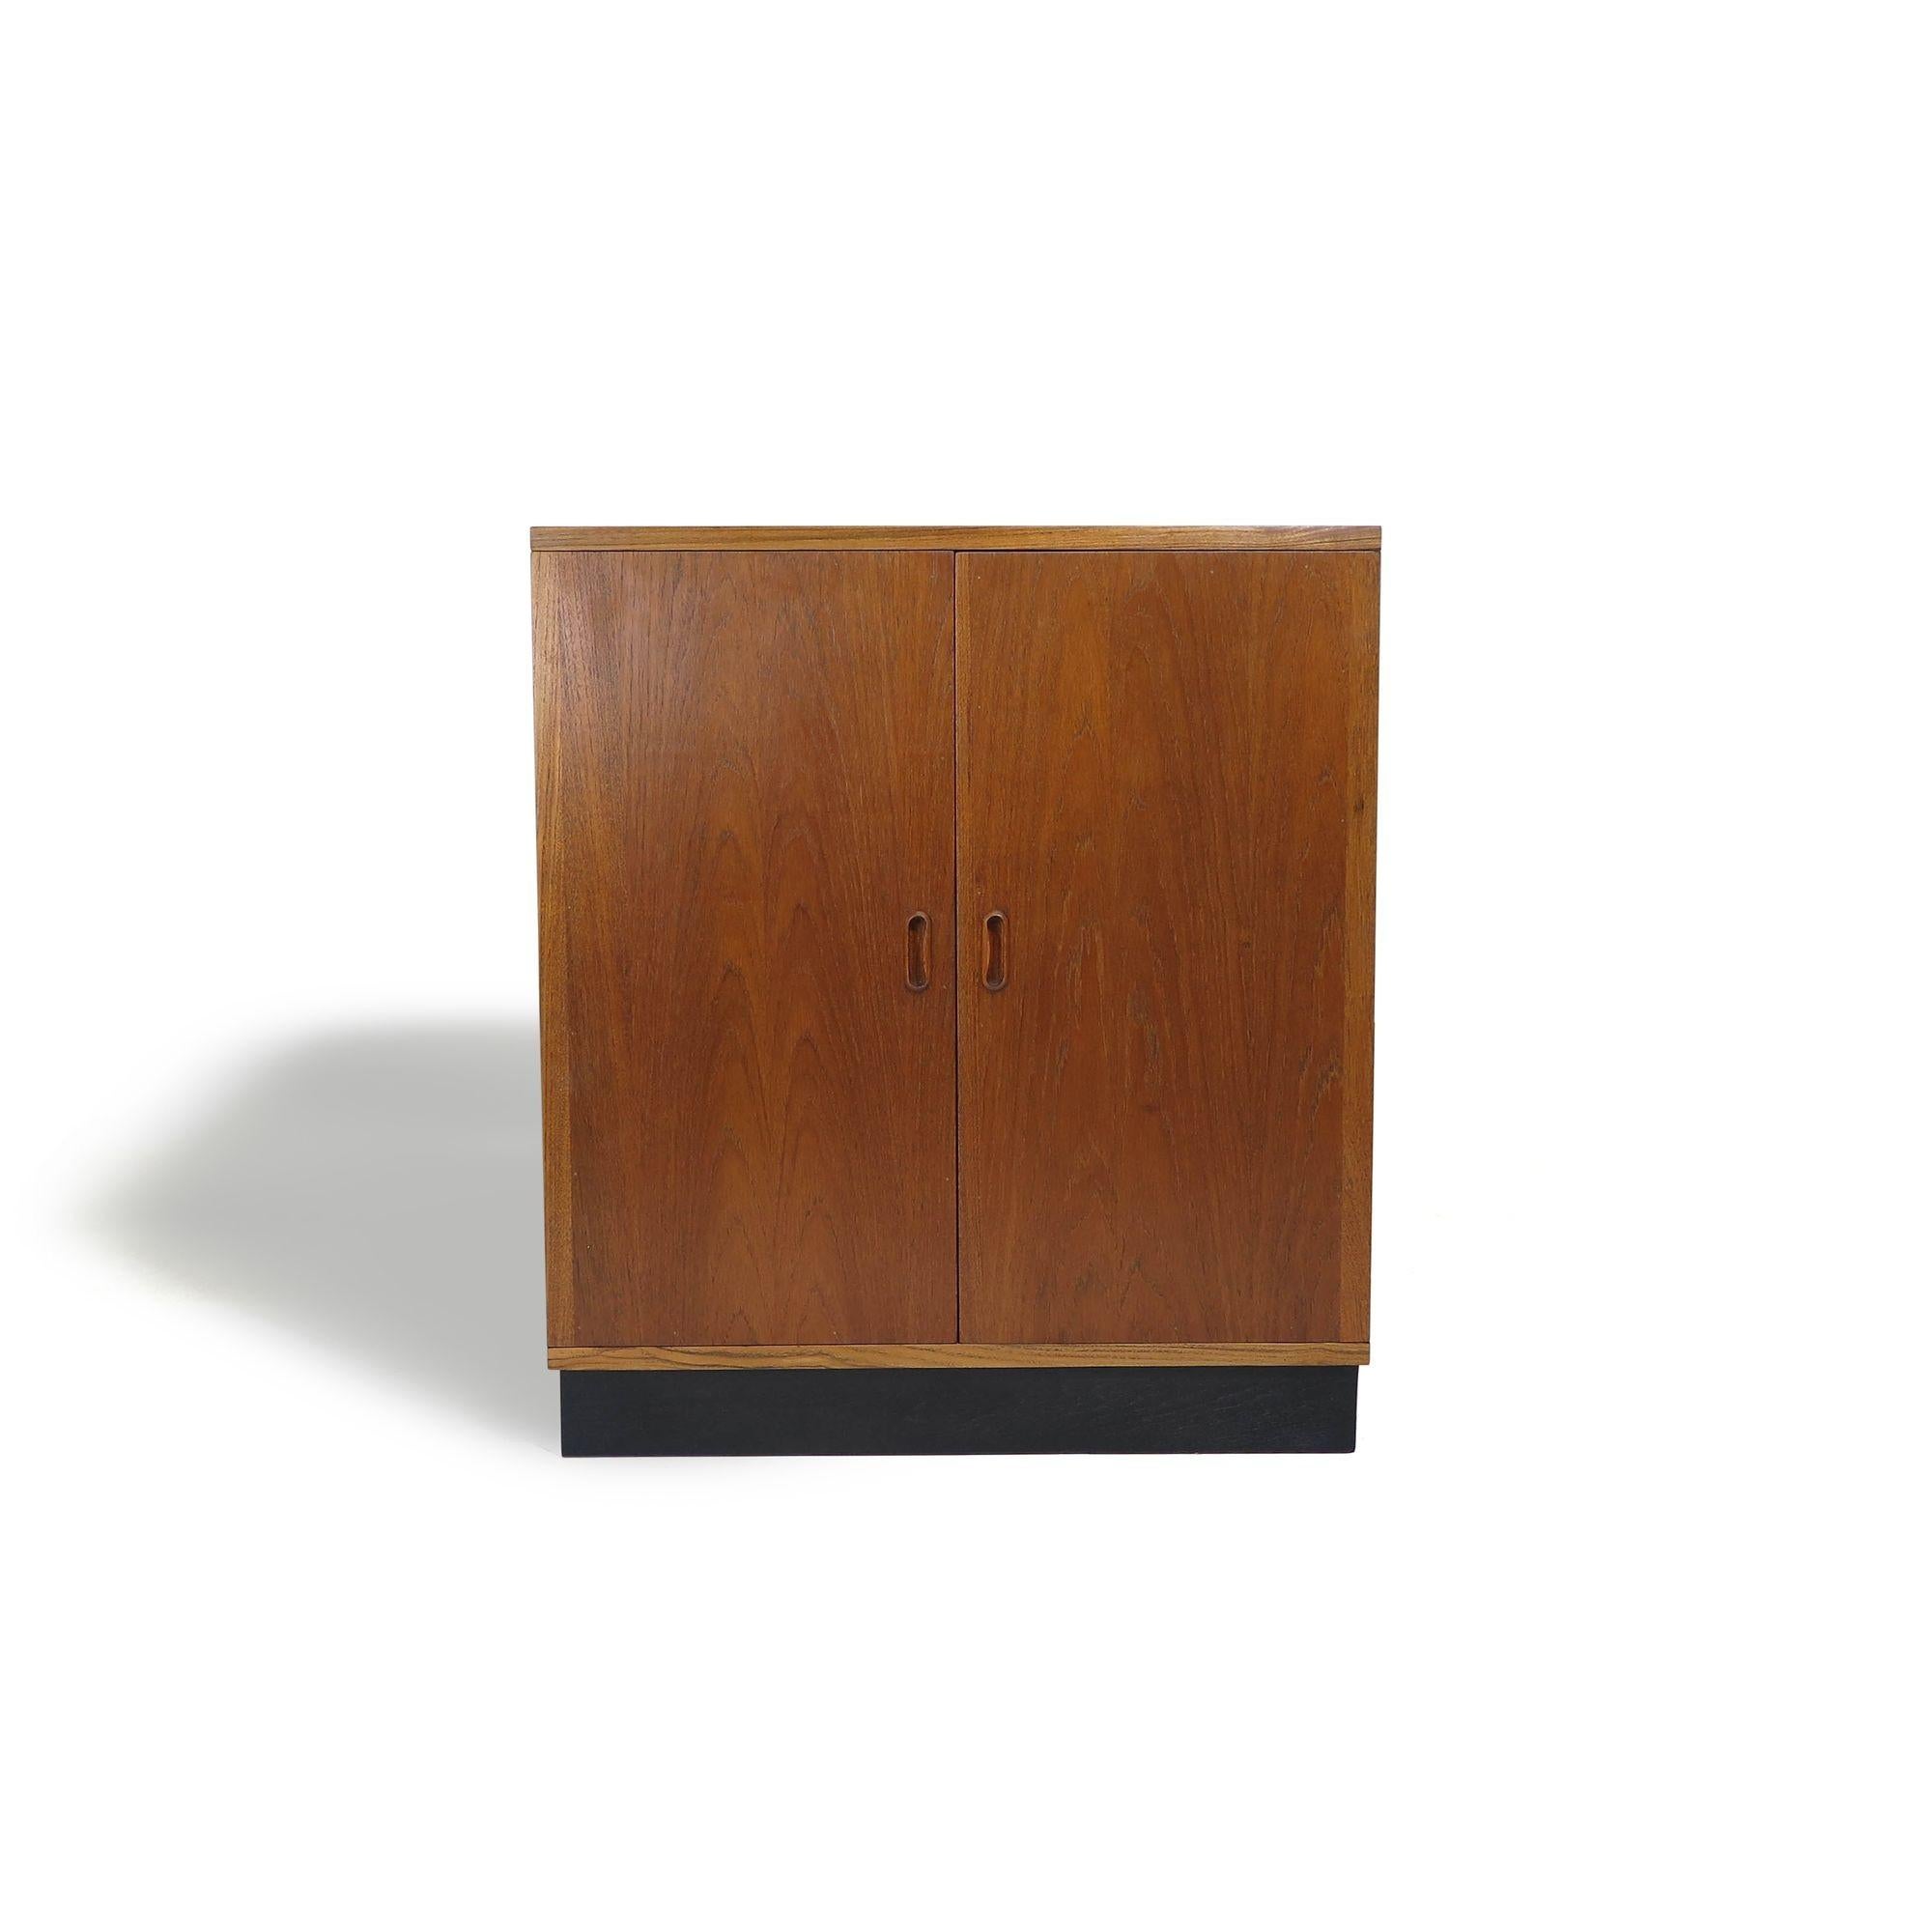 Mid century teak cabinet in manner of Hans Olsen with series of interior gradient colored drawers.

Measurements
W 32